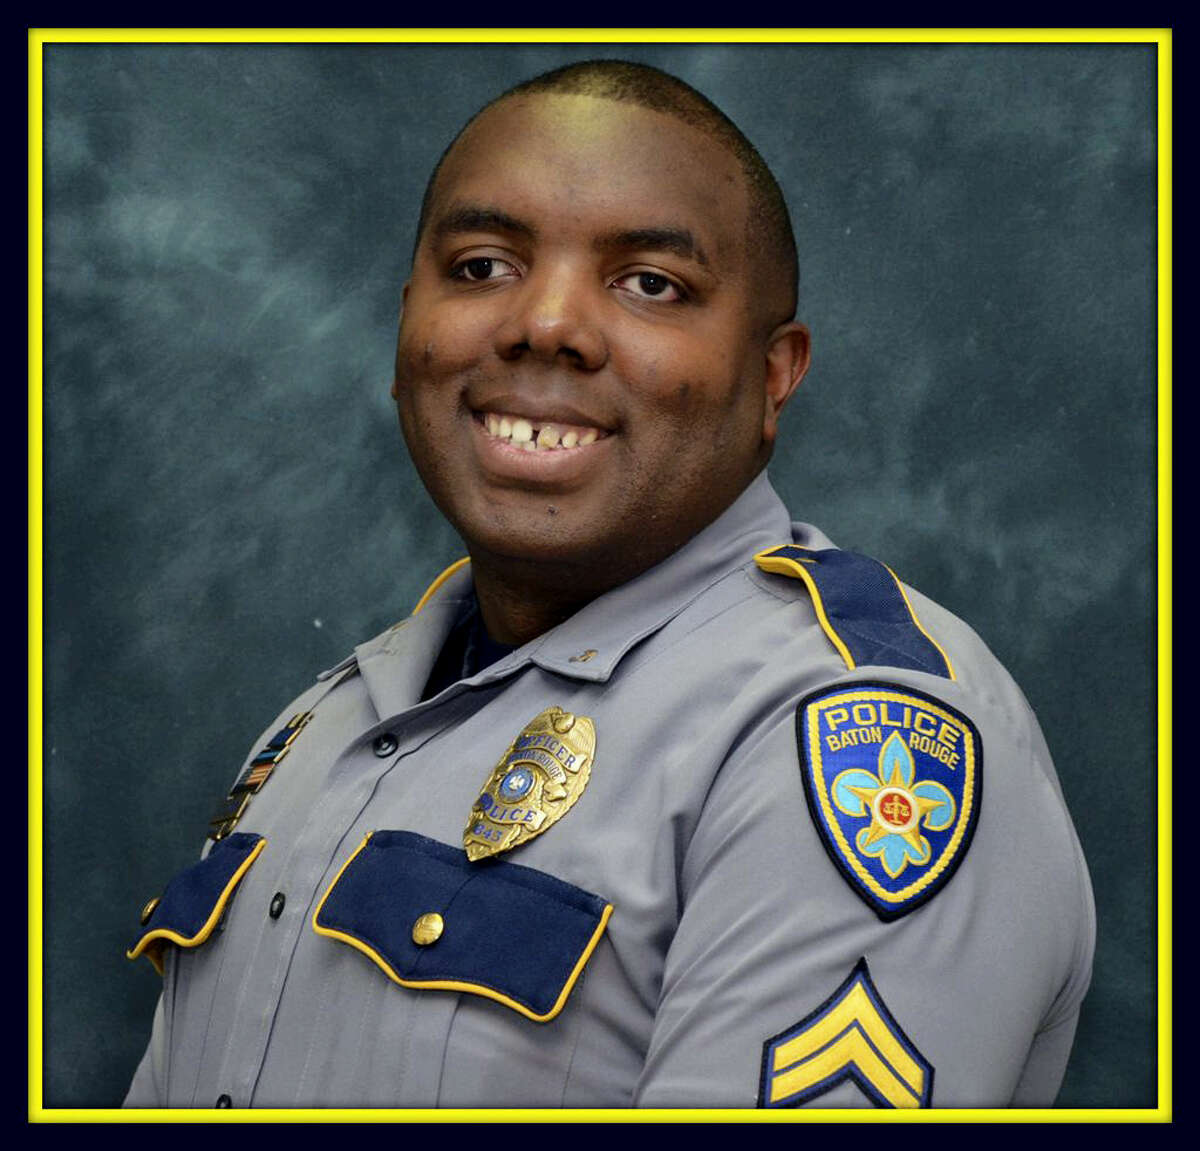 This undated photo made available by the Baton Rouge Police Dept. shows officer Montrell Jackson. Funeral services are planned Monday, July 25, 2016 for police officer Montrell Jackson, a 32-year-old slain by a gunman who authorities said targeted law enforcement.